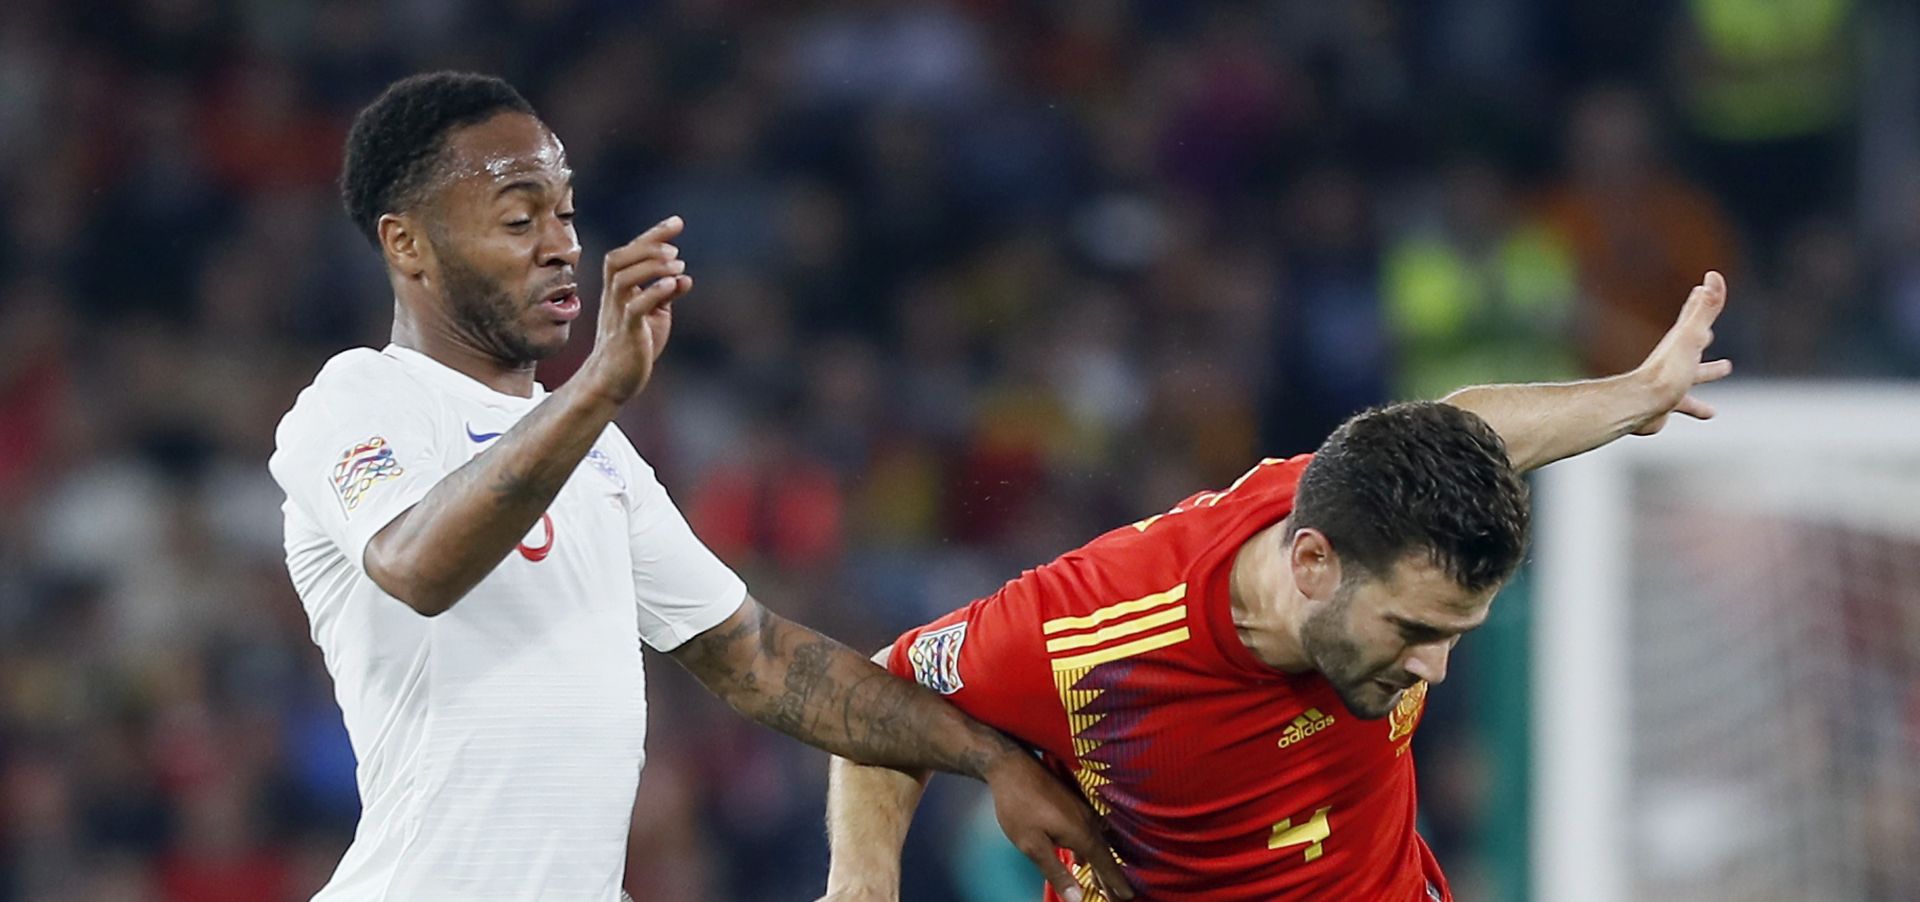 epa07095840 England's Raheem Sterling (L) in action against Spain's Nacho Fernandez (R) during the UEFA Nations League soccer match between Spain and England at Benito Villamarin stadium in Seville, southern Spain, 15 October 2018.  EPA/JOSE MANUEL VIDAL